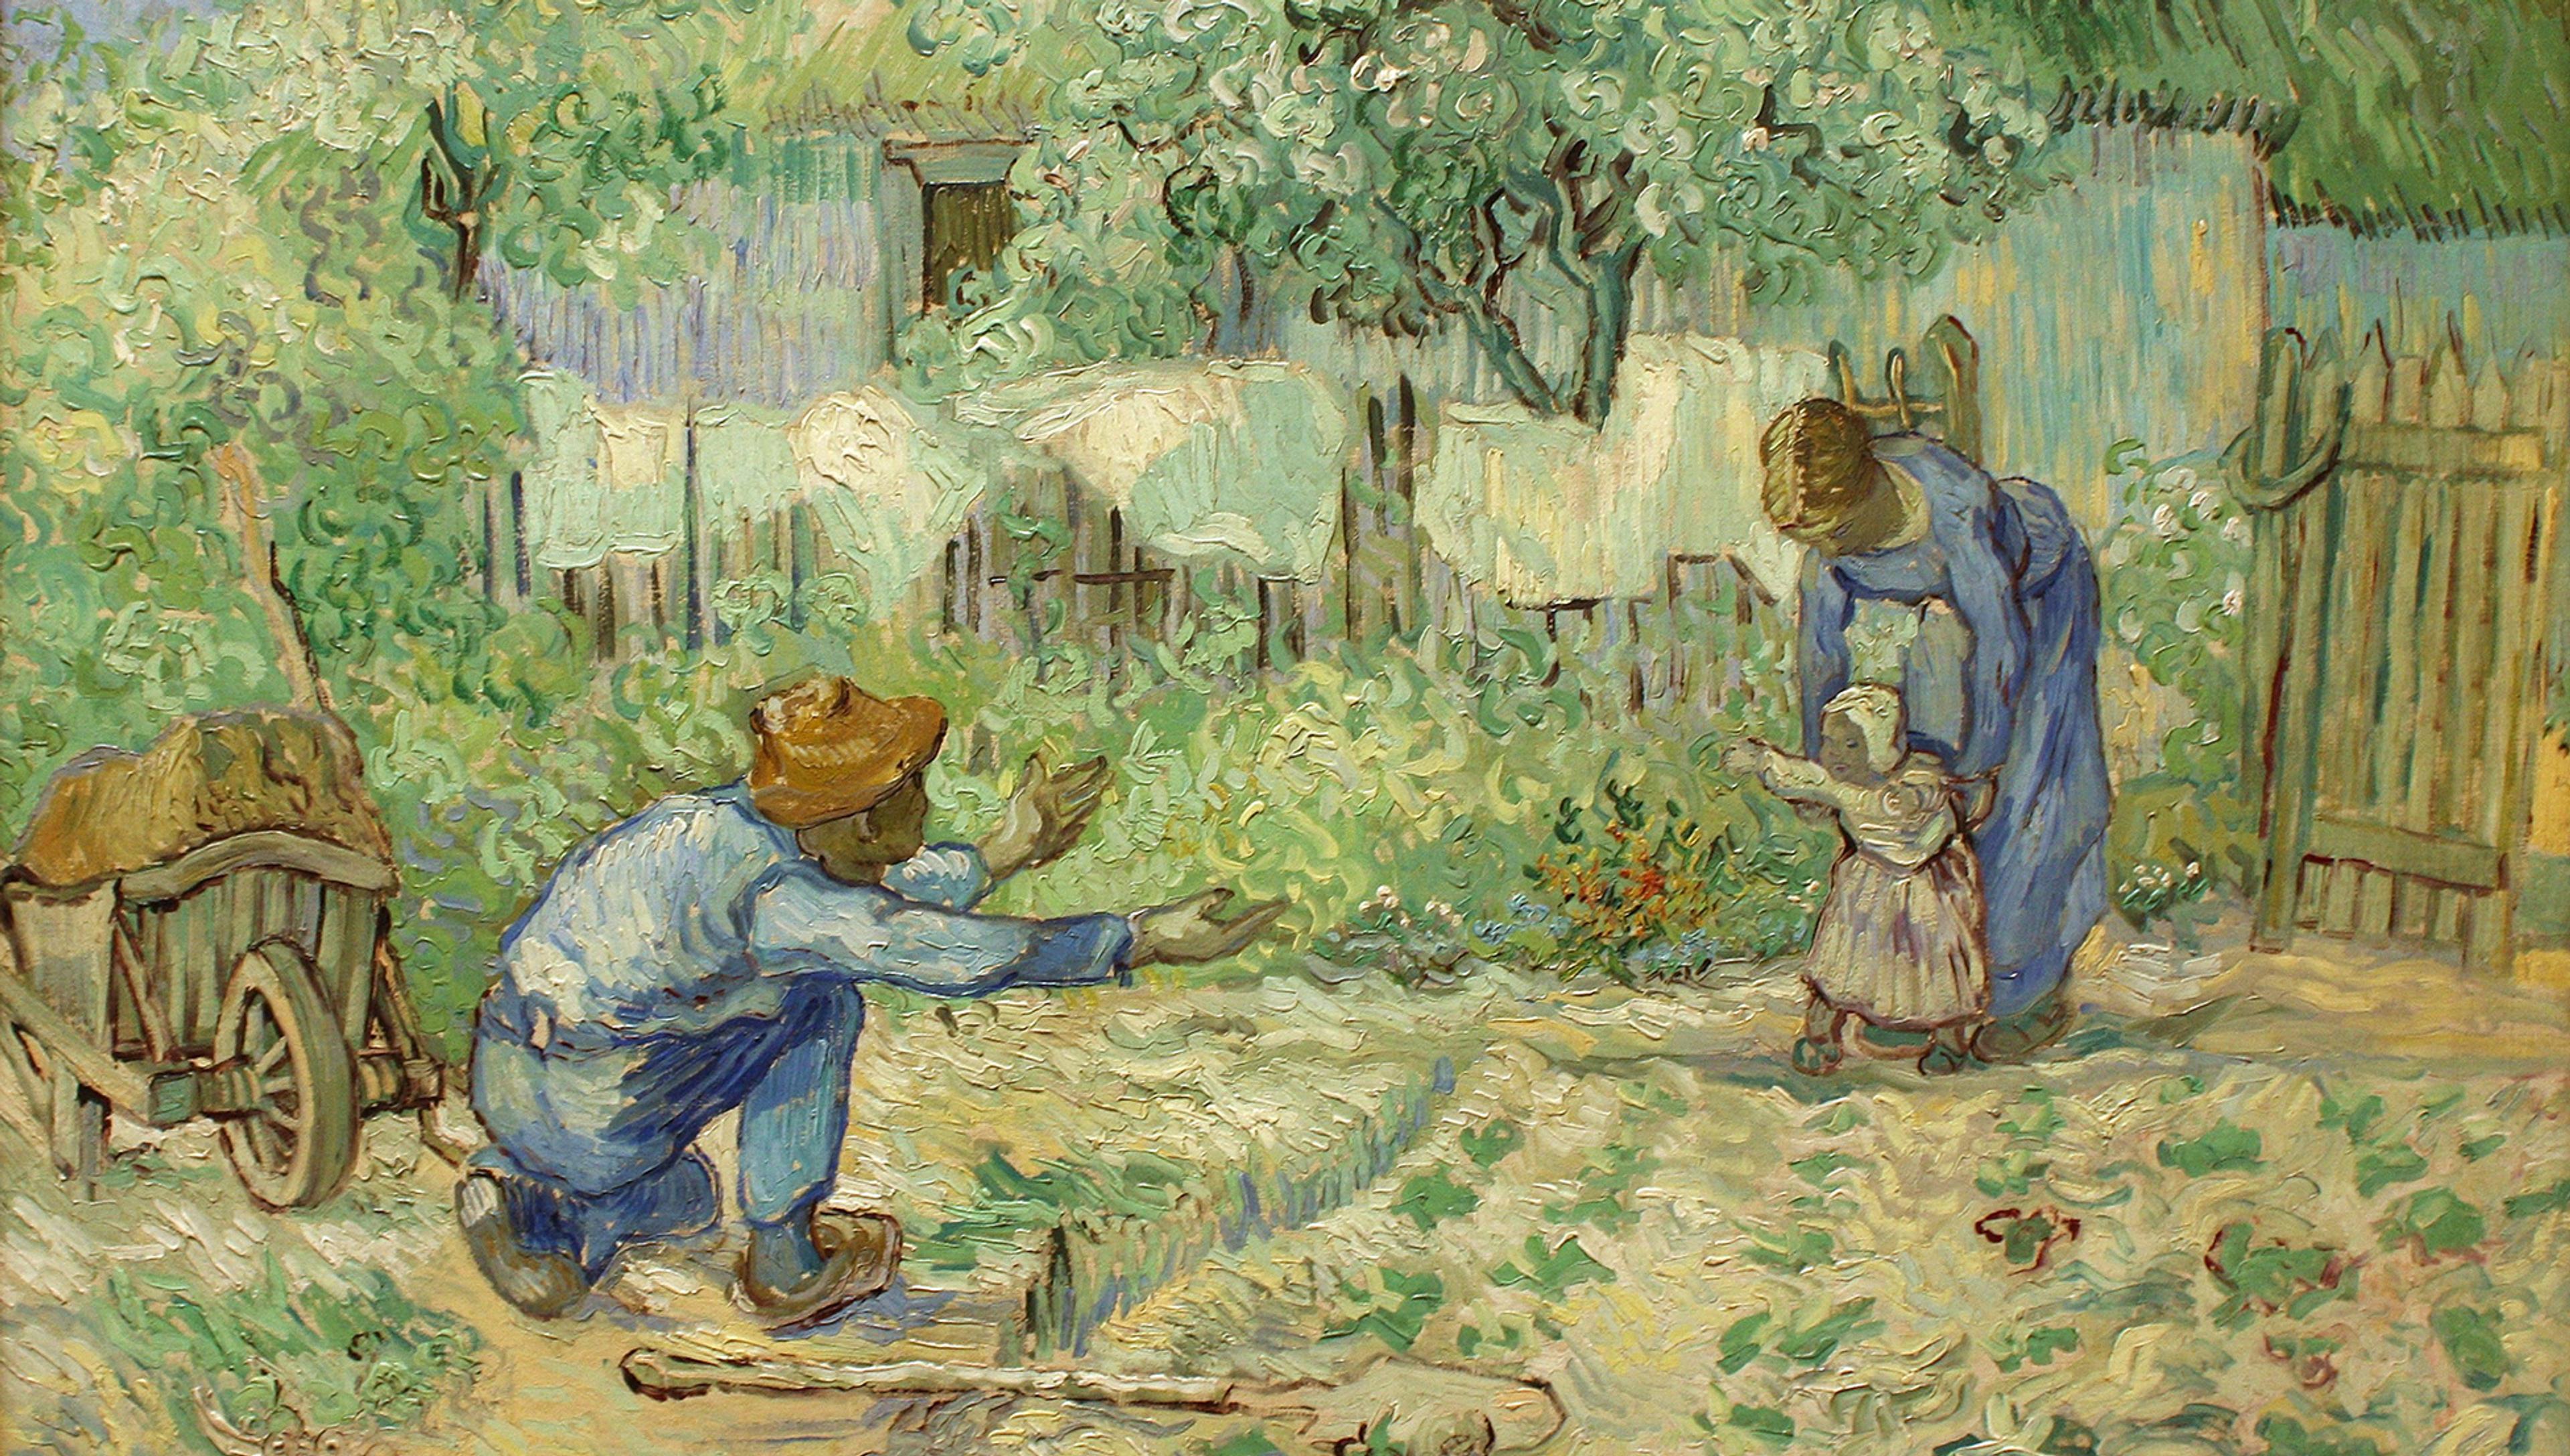 Impressionist painting of a family in a garden, with a child learning to walk, assisted by an adult, as another adult crouches down with outstretched arms.